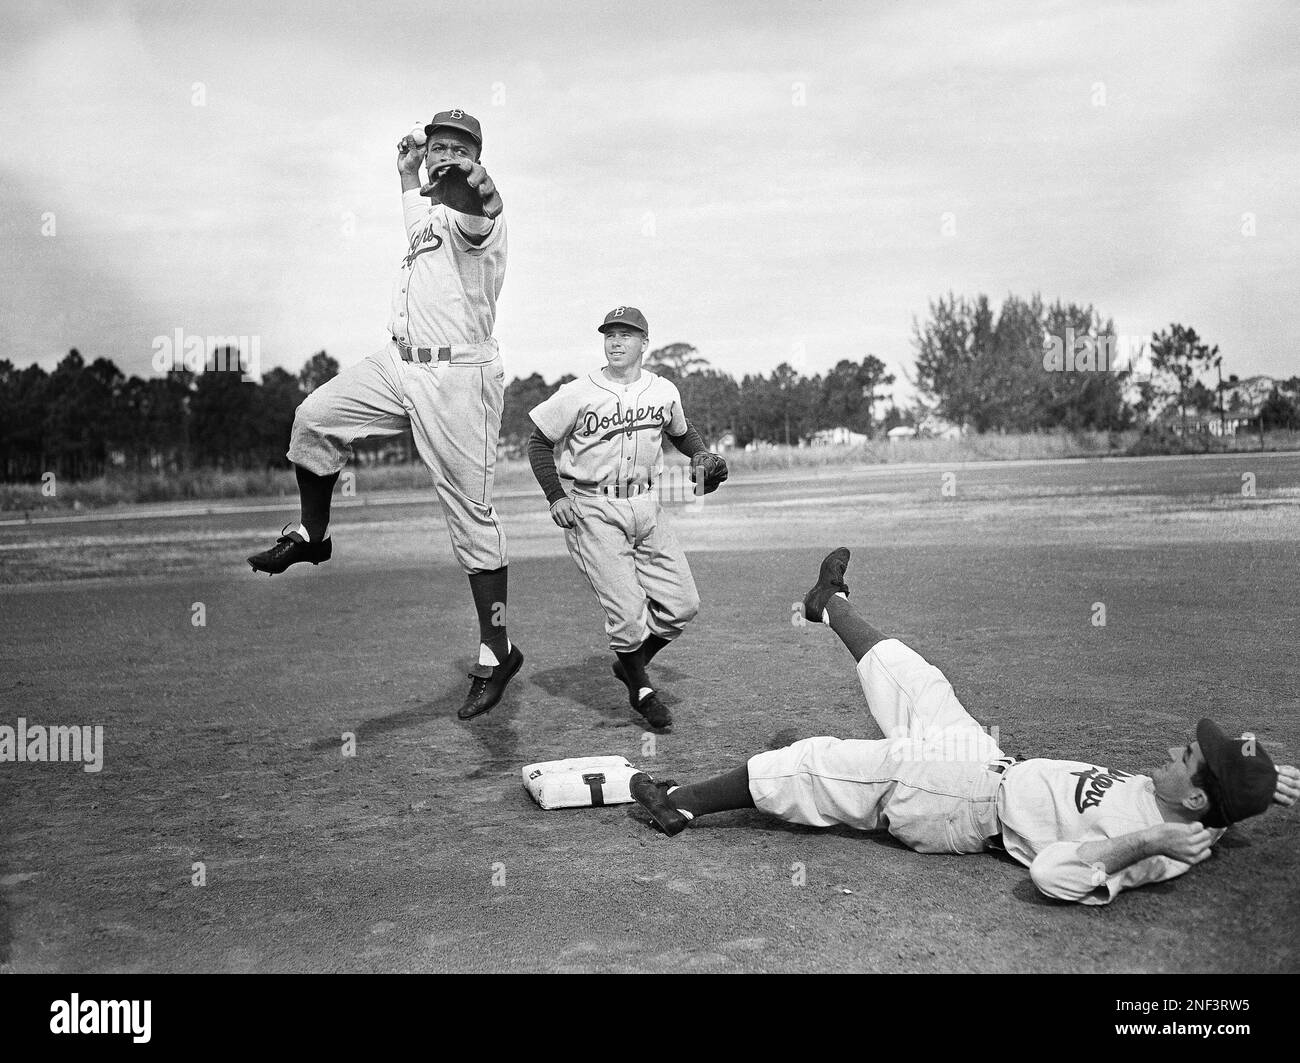 jackie robinson and pee wee reese photo